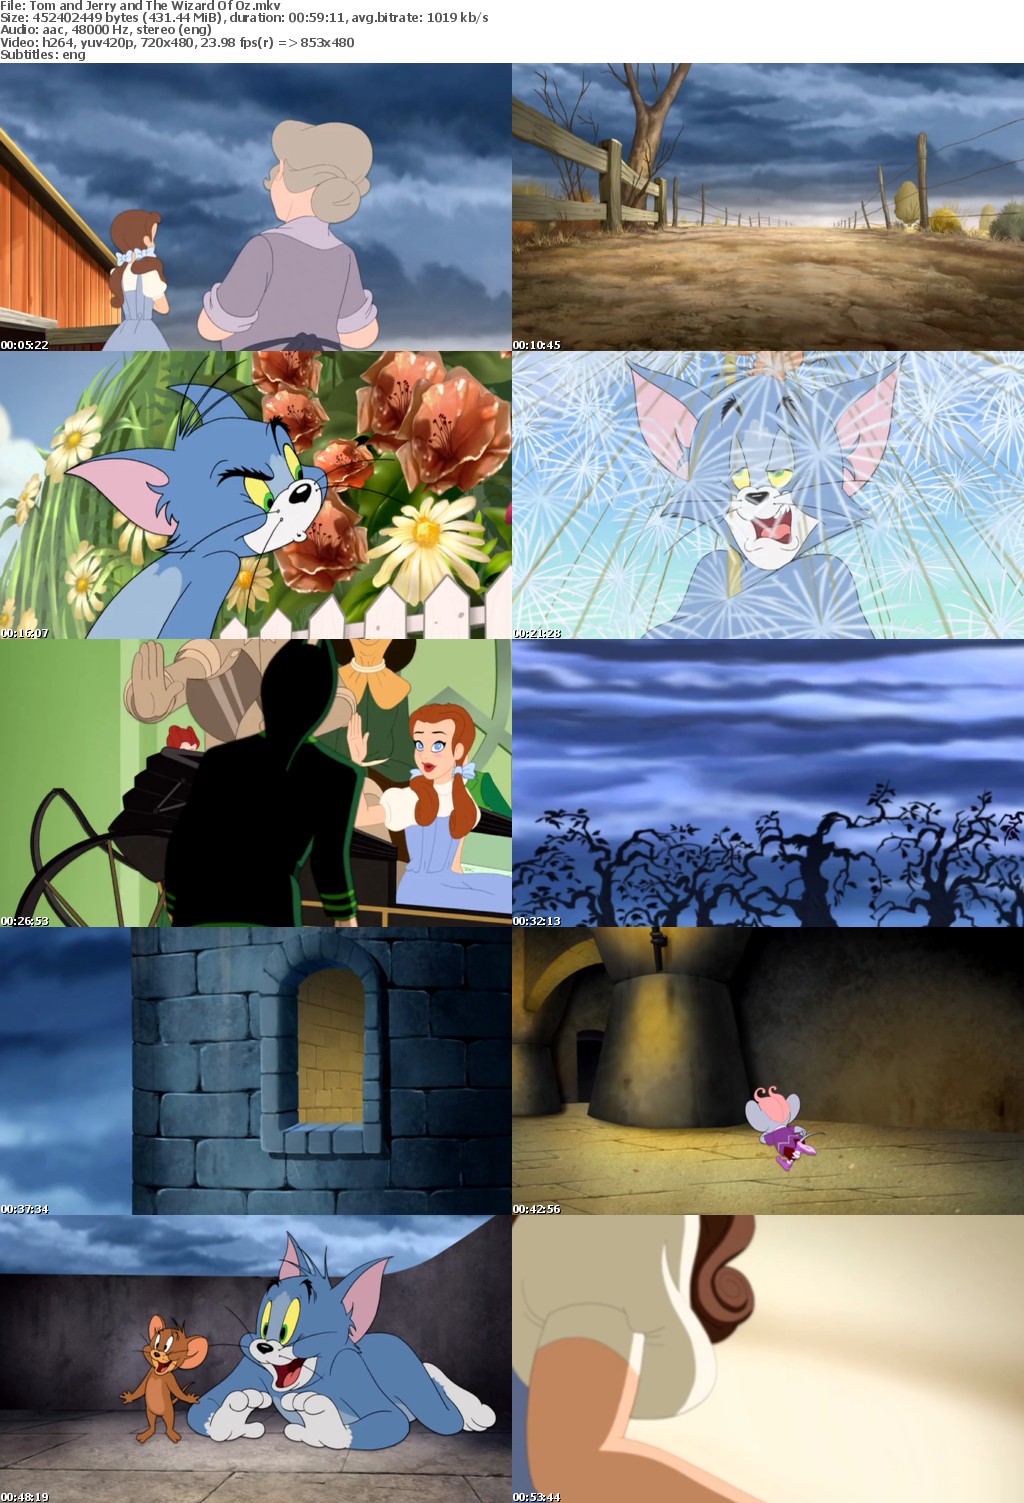 Tom and Jerry amp; The Wizard of Oz (2011) 480p x264 schuylang